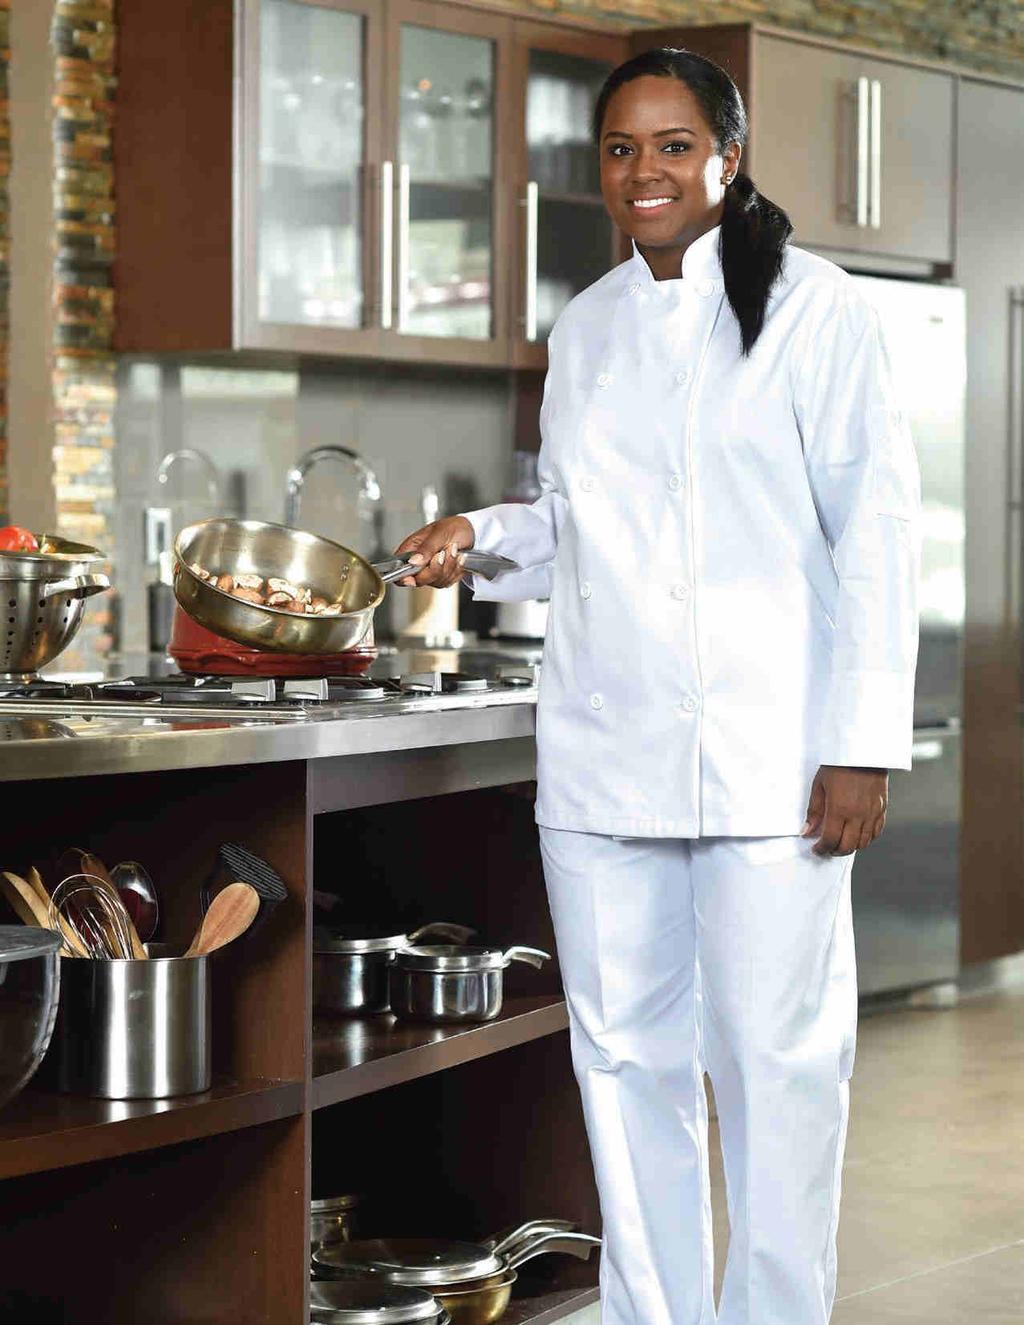 CHEF COATS Ladies 5300 lds ladies Chef Coat Specially fitted for ladies.